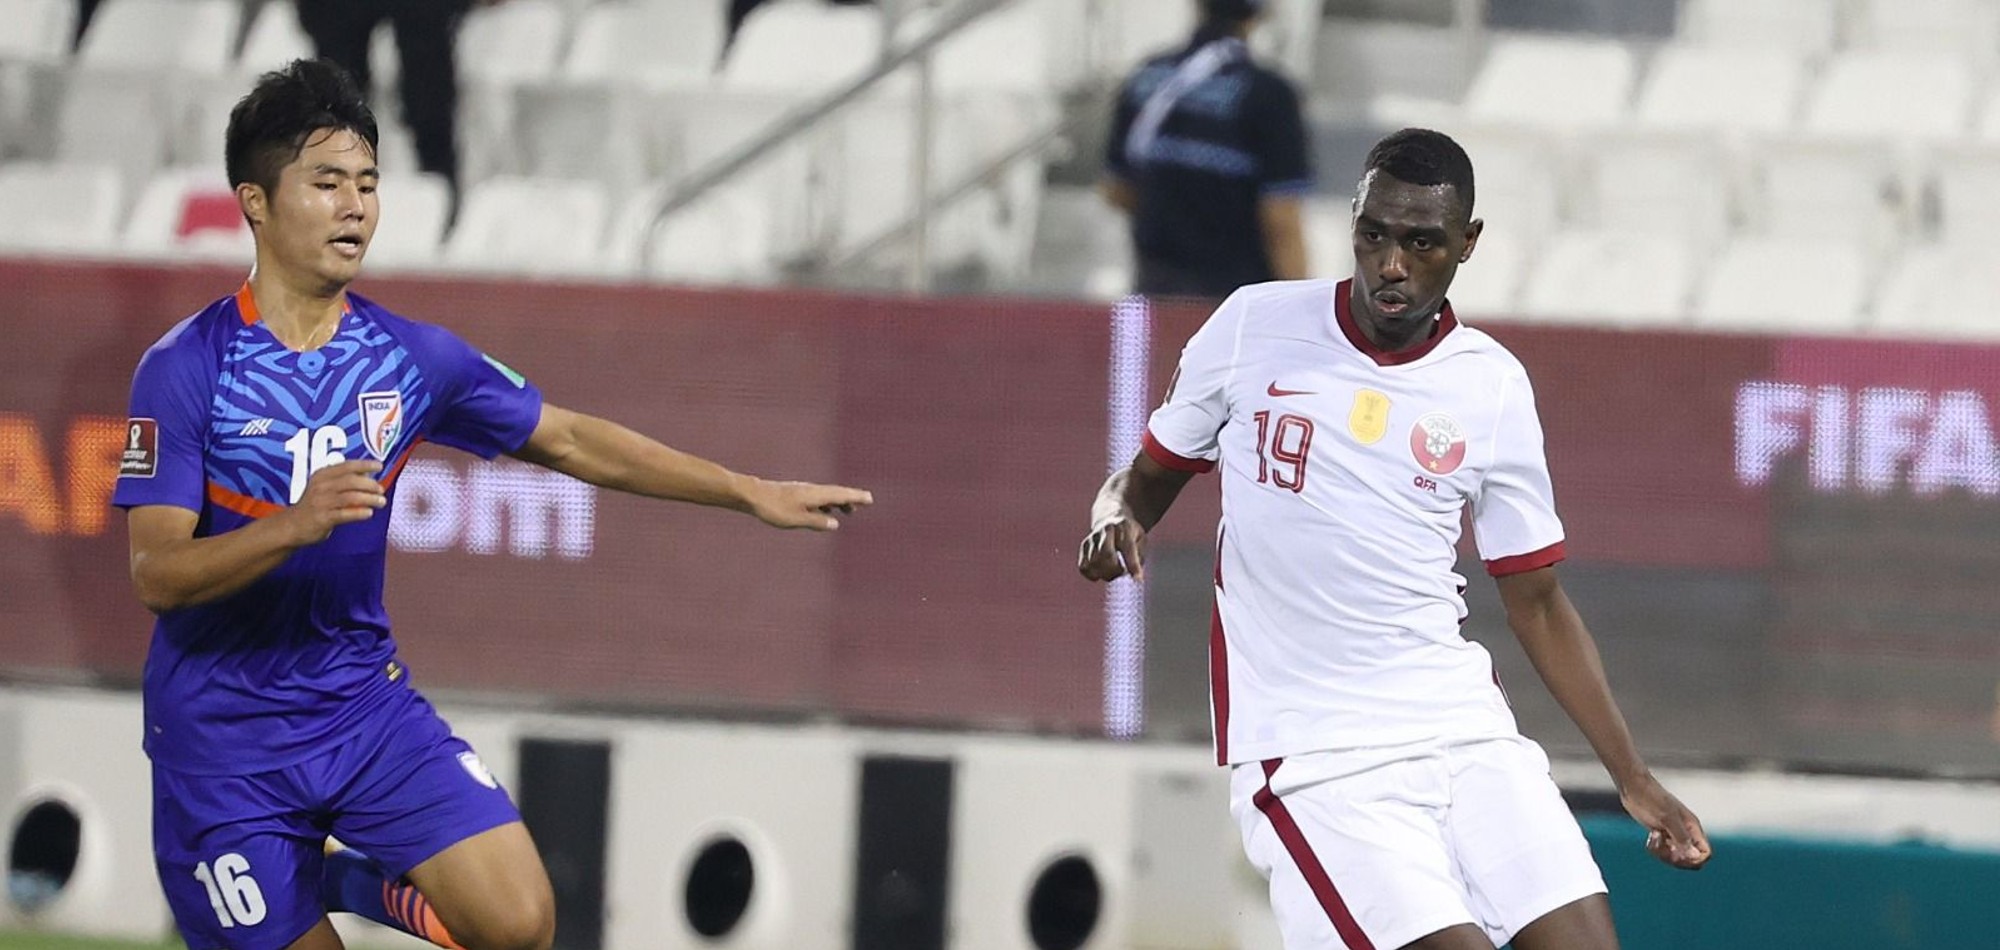 Playing in a World Cup on home soil is a dream come true: Qatar players